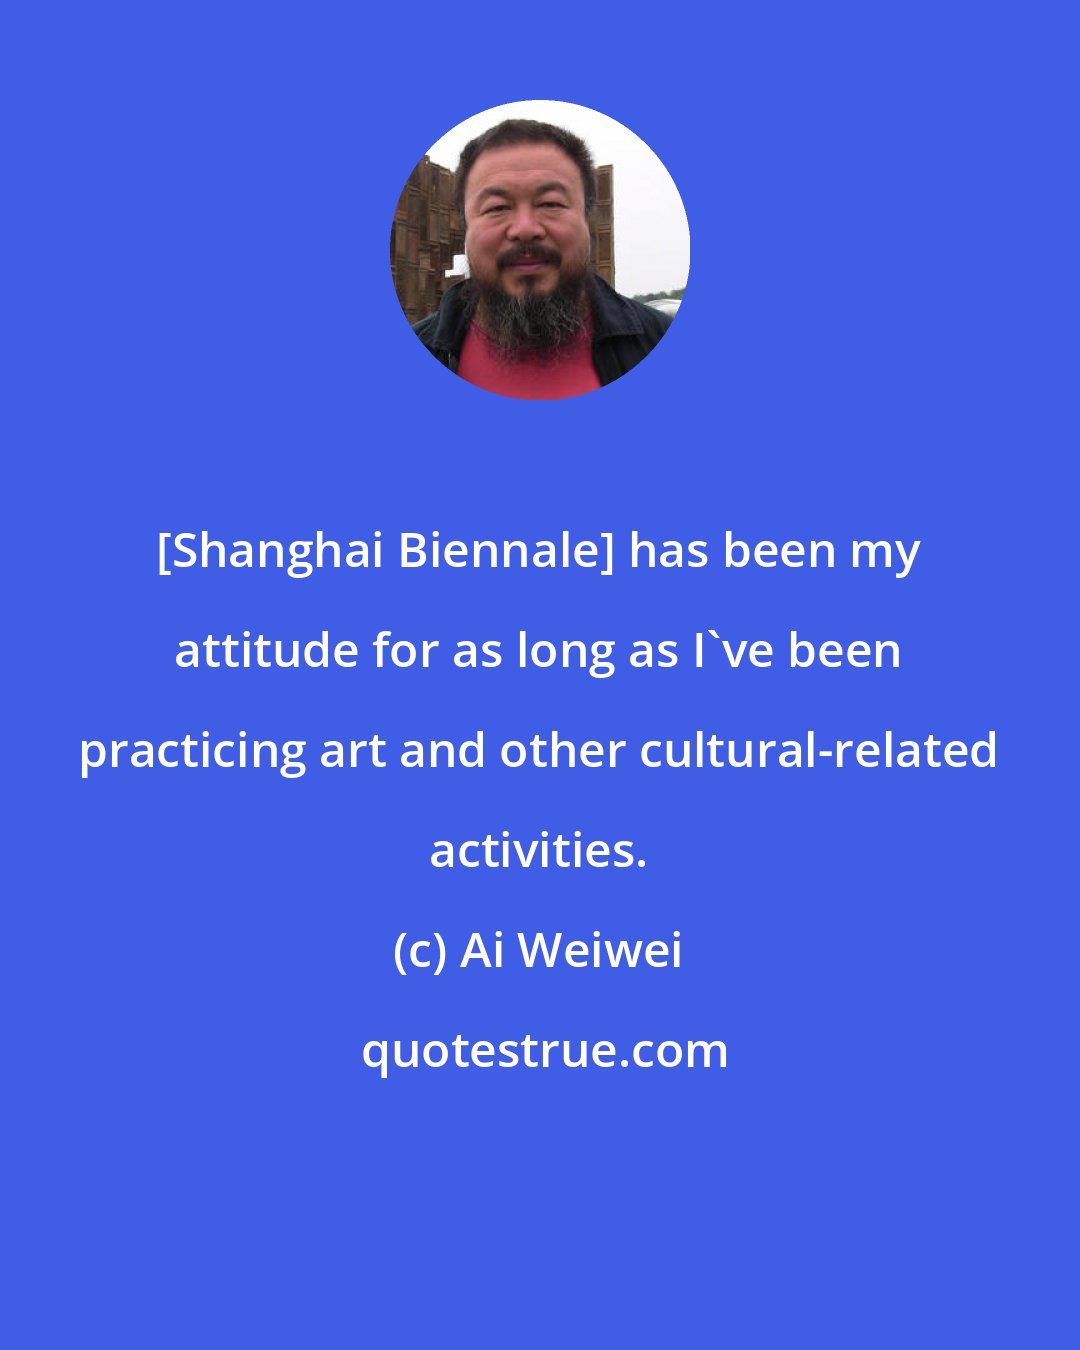 Ai Weiwei: [Shanghai Biennale] has been my attitude for as long as I've been practicing art and other cultural-related activities.